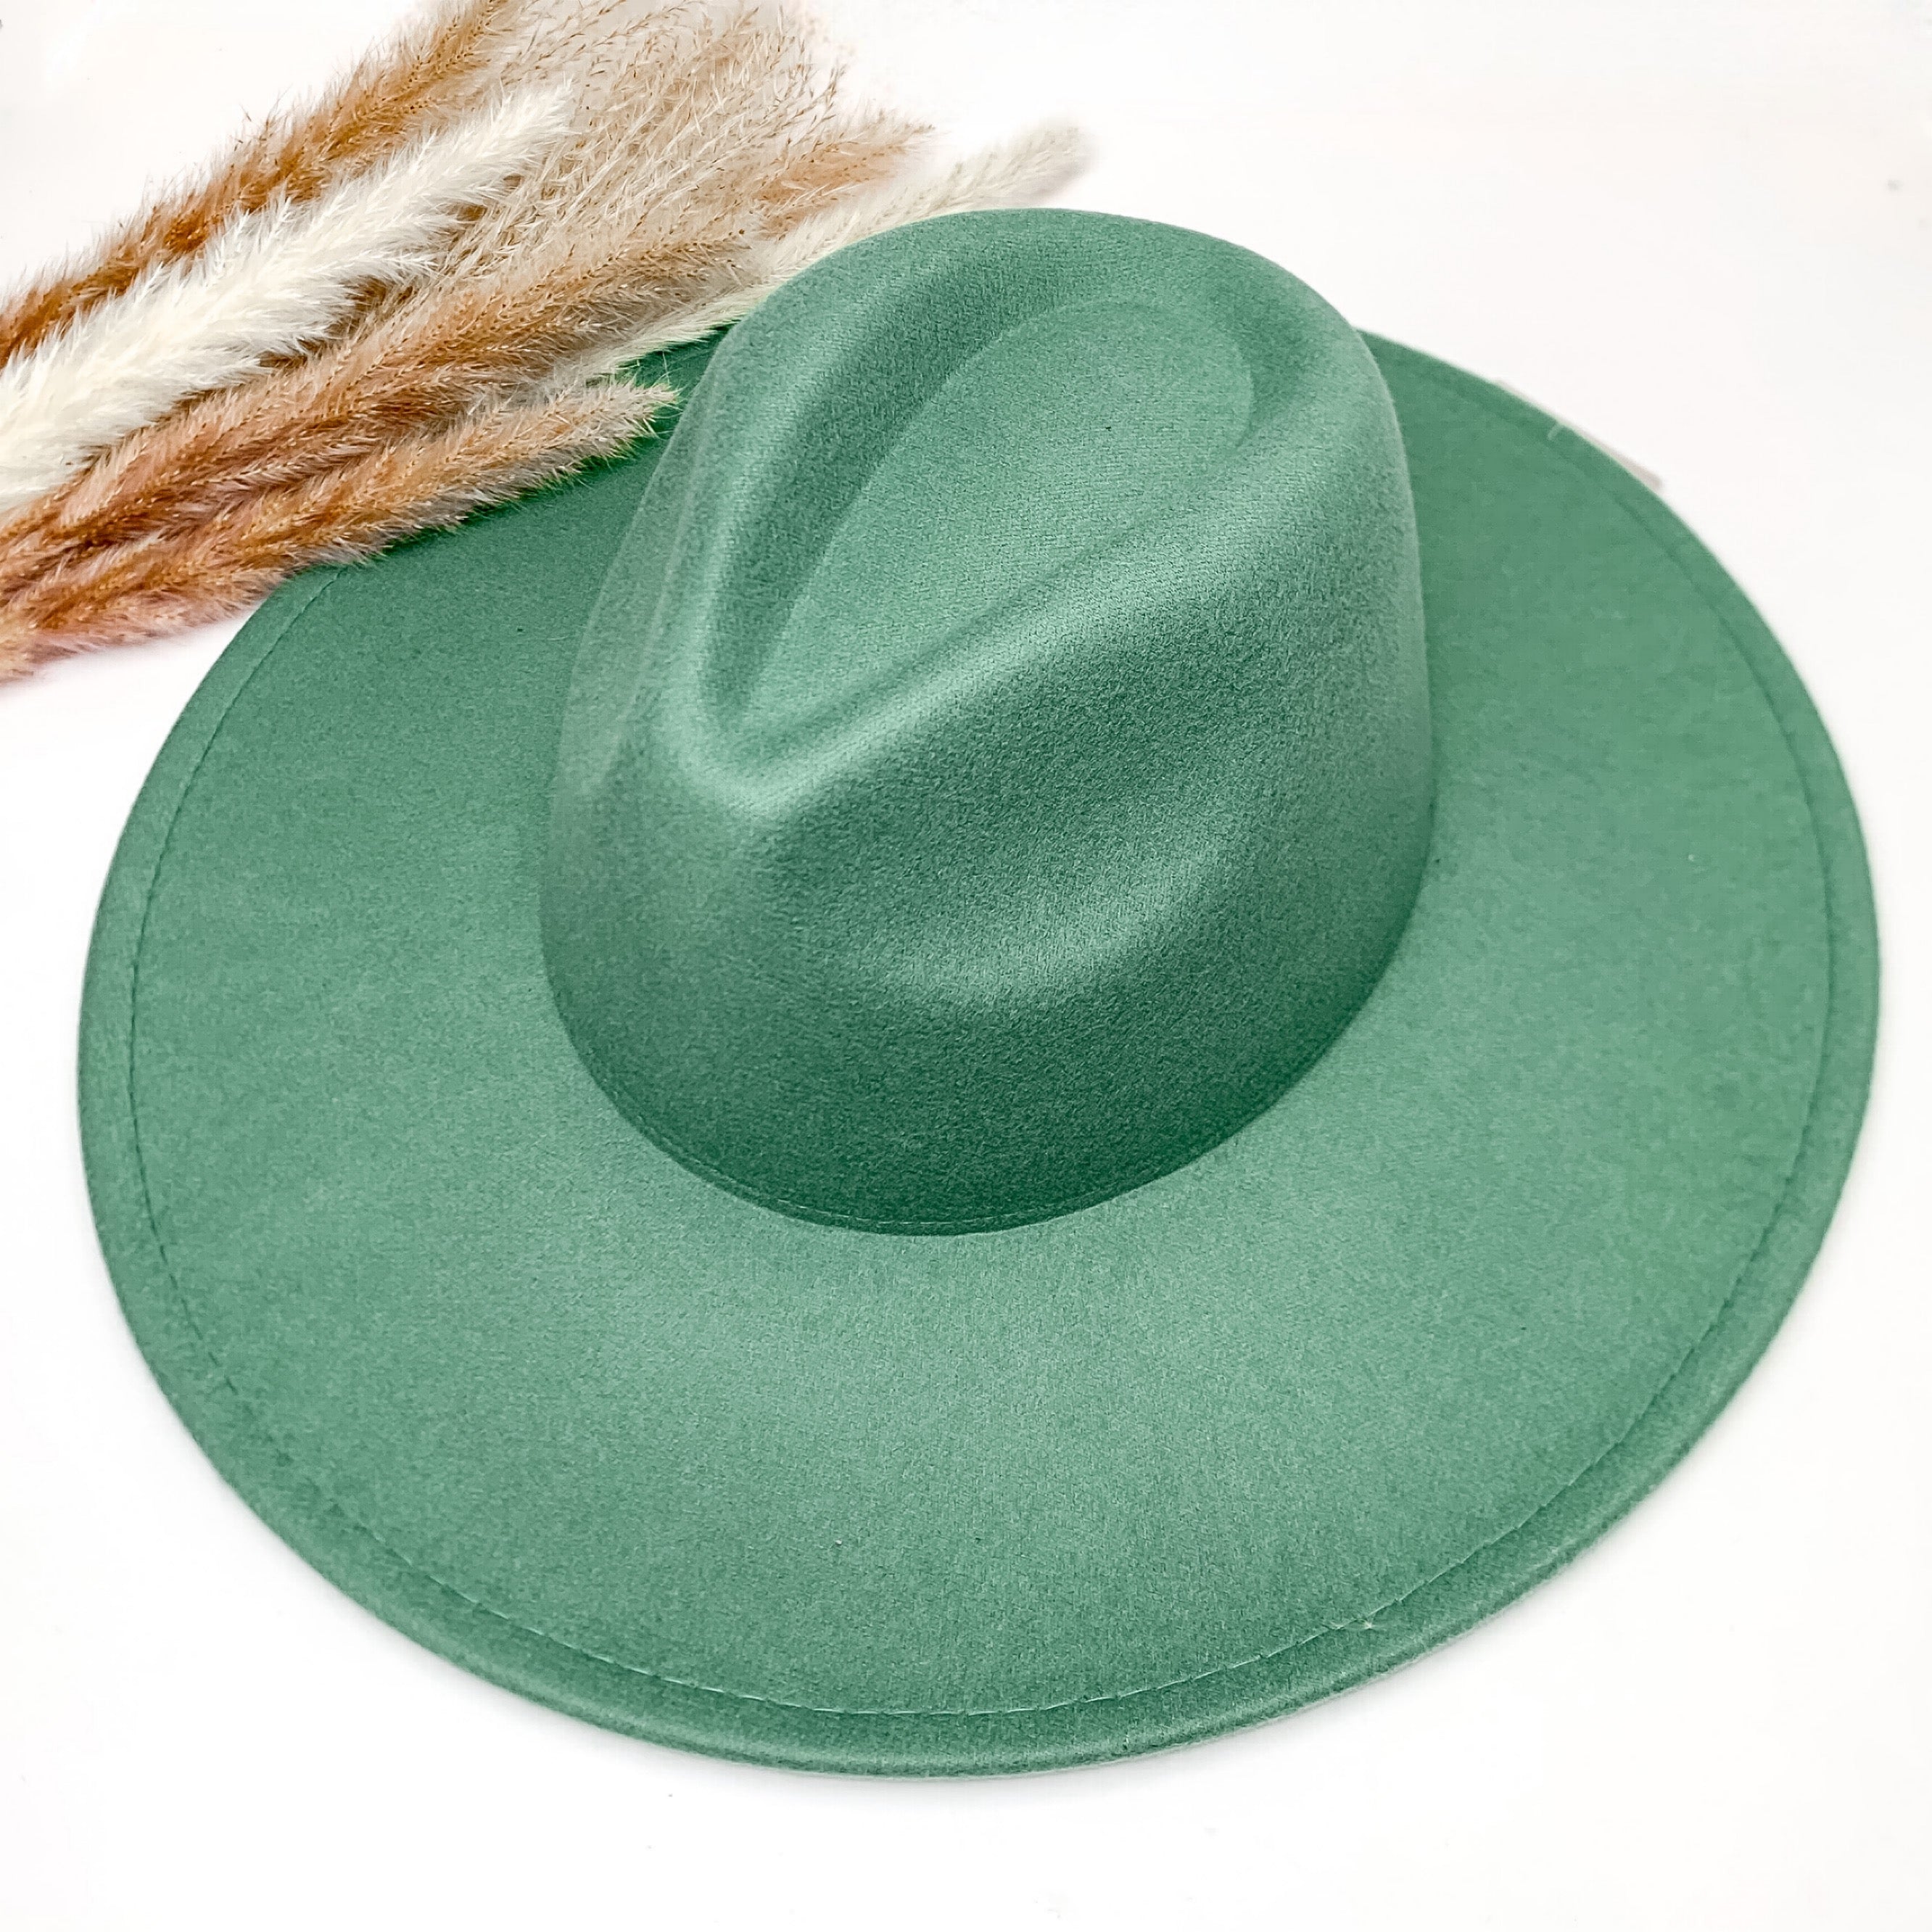 Plain and simple faux felt hat in turquoise green color. This hat is sitting on a white background. There is brown and white feathers to the left of the hat.